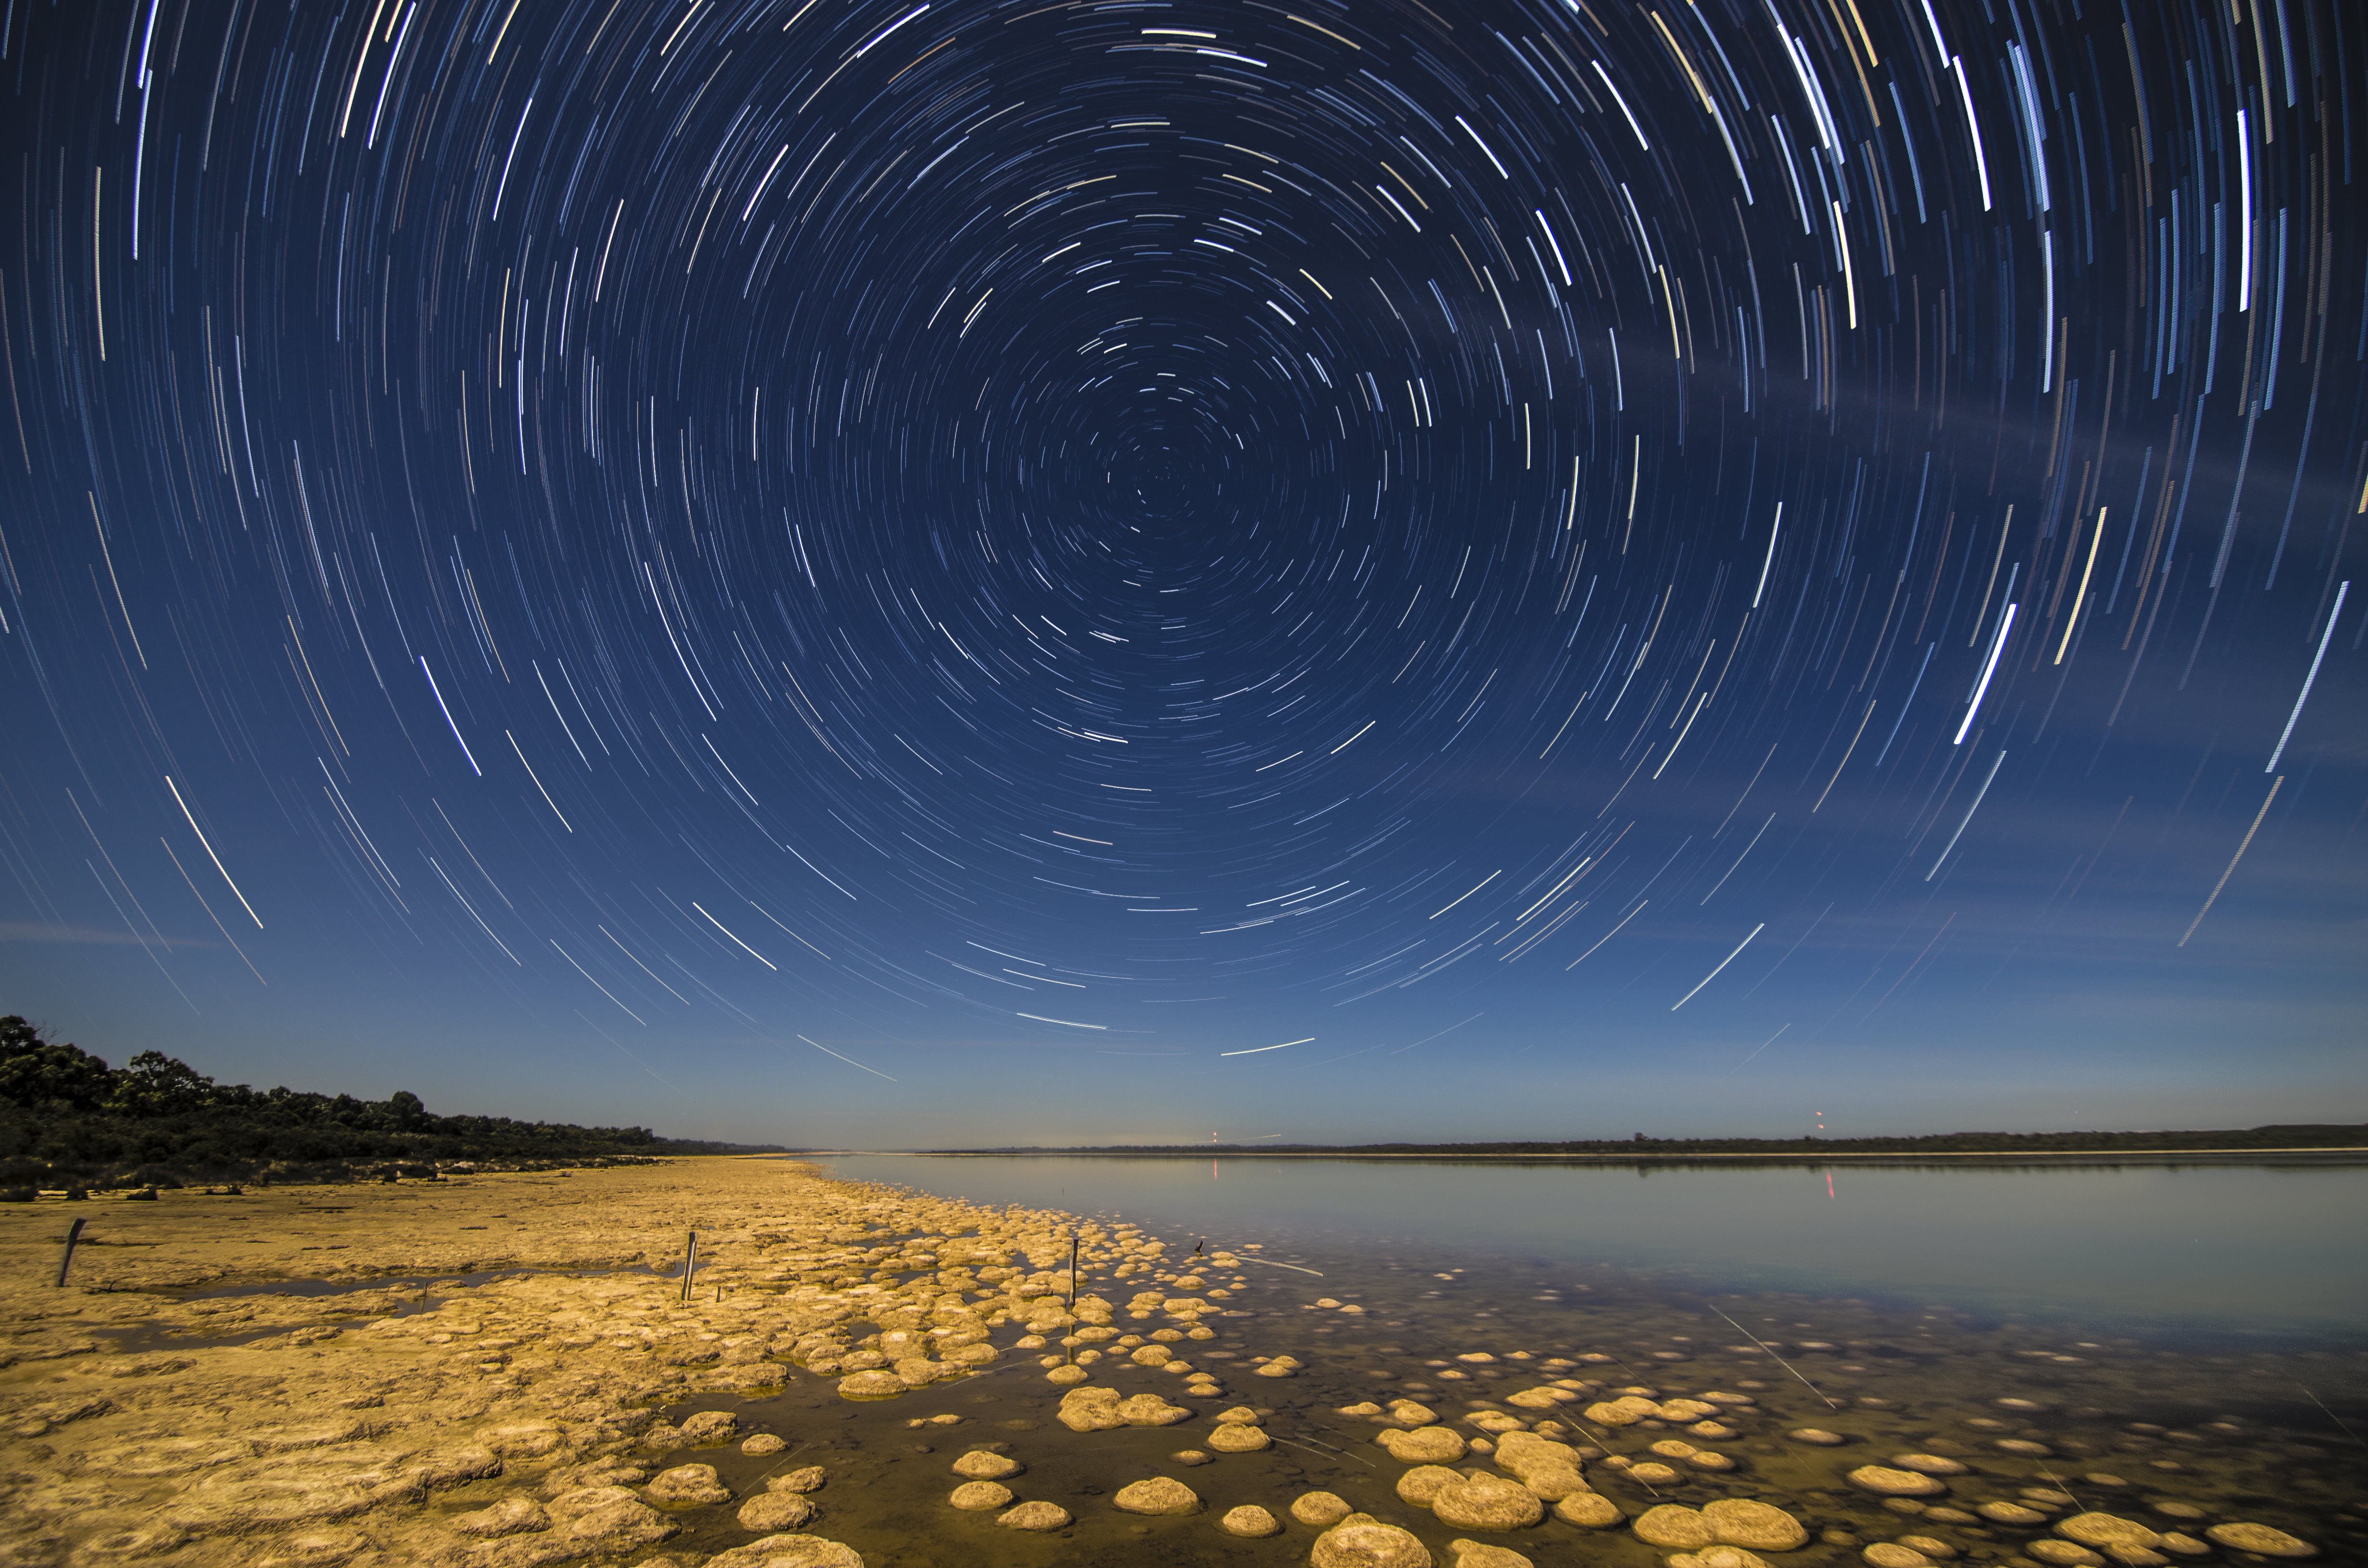 timelapse photo of star over calm body of water, lake clifton, lake clifton